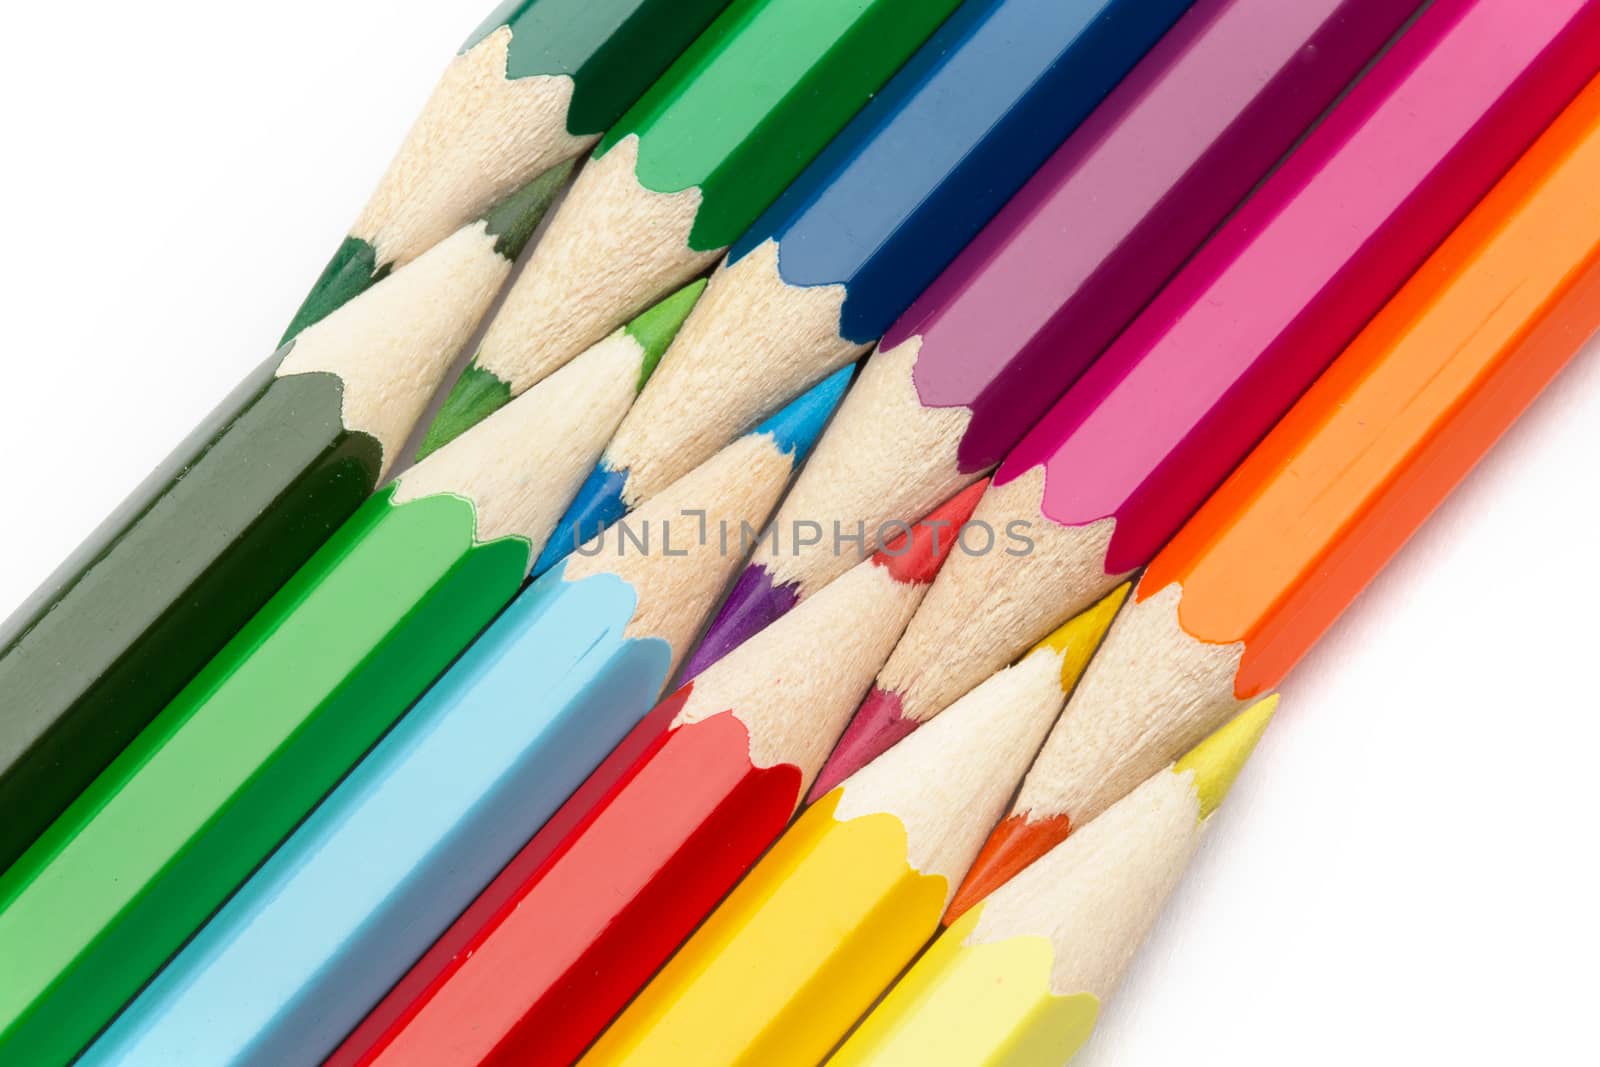 A lot of colorful wooden pencils on a white background by 25ehaag6